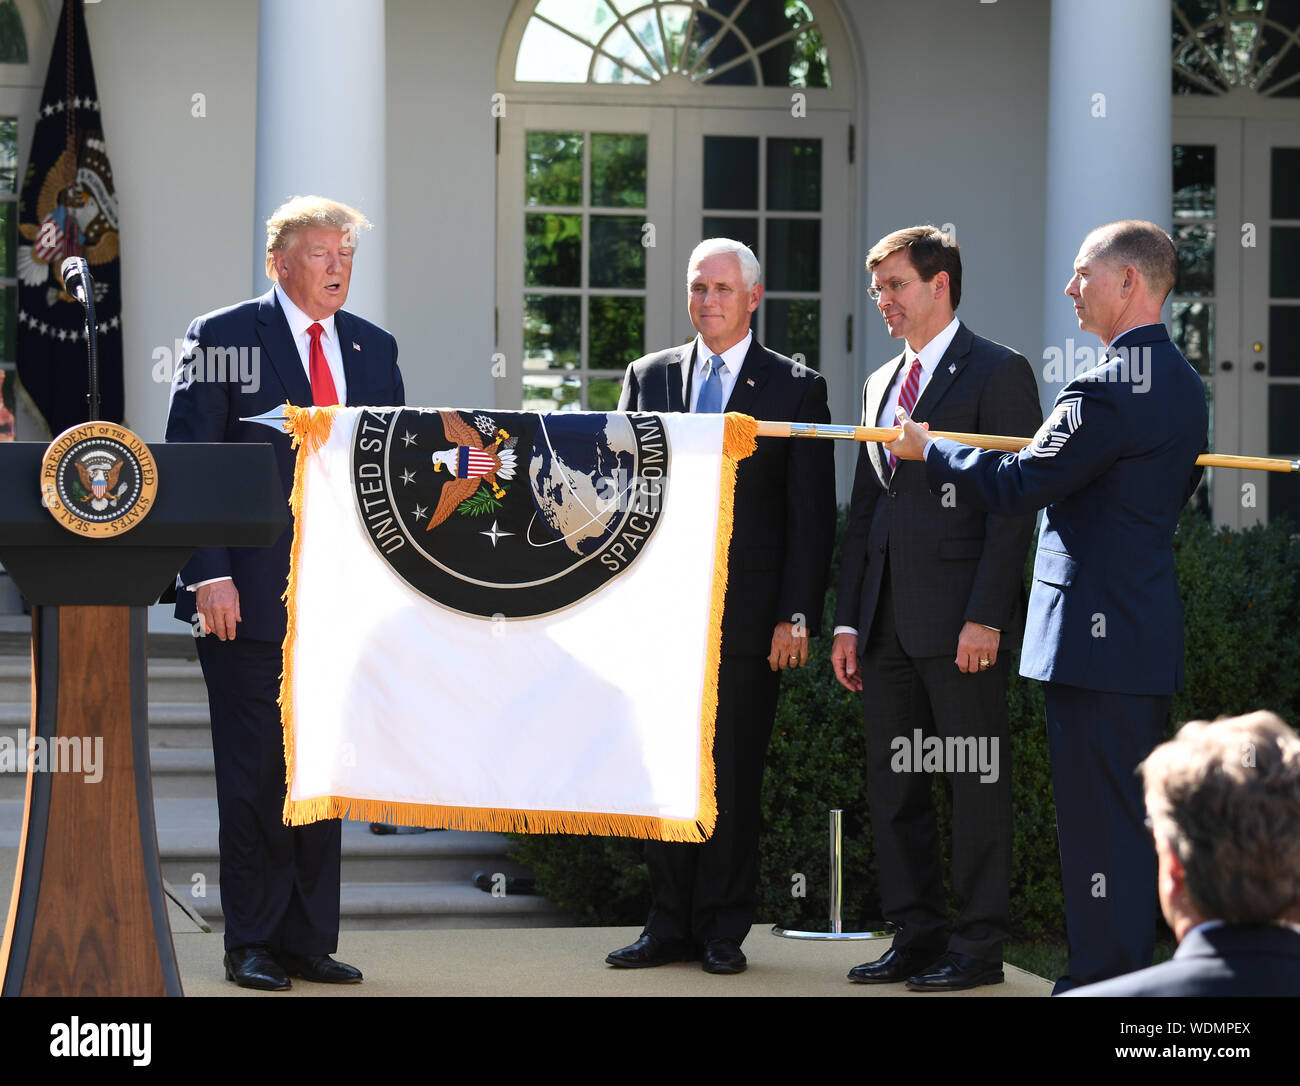 Washington, United States. 29th Aug, 2019. President Donald Trump, Vice President Mike Pence and Secretary of Defense Mark Esper look on as the flag of the Space Command is unfurled in the Rose Garden of the White House in Washington, DC on Thursday, August 29, 2019. The President announced Space Command's official establishment, or to be more precise, it's re-establishment after it had been eliminated in 2002. Photo by Pat Benic/UPI Credit: UPI/Alamy Live News Stock Photo